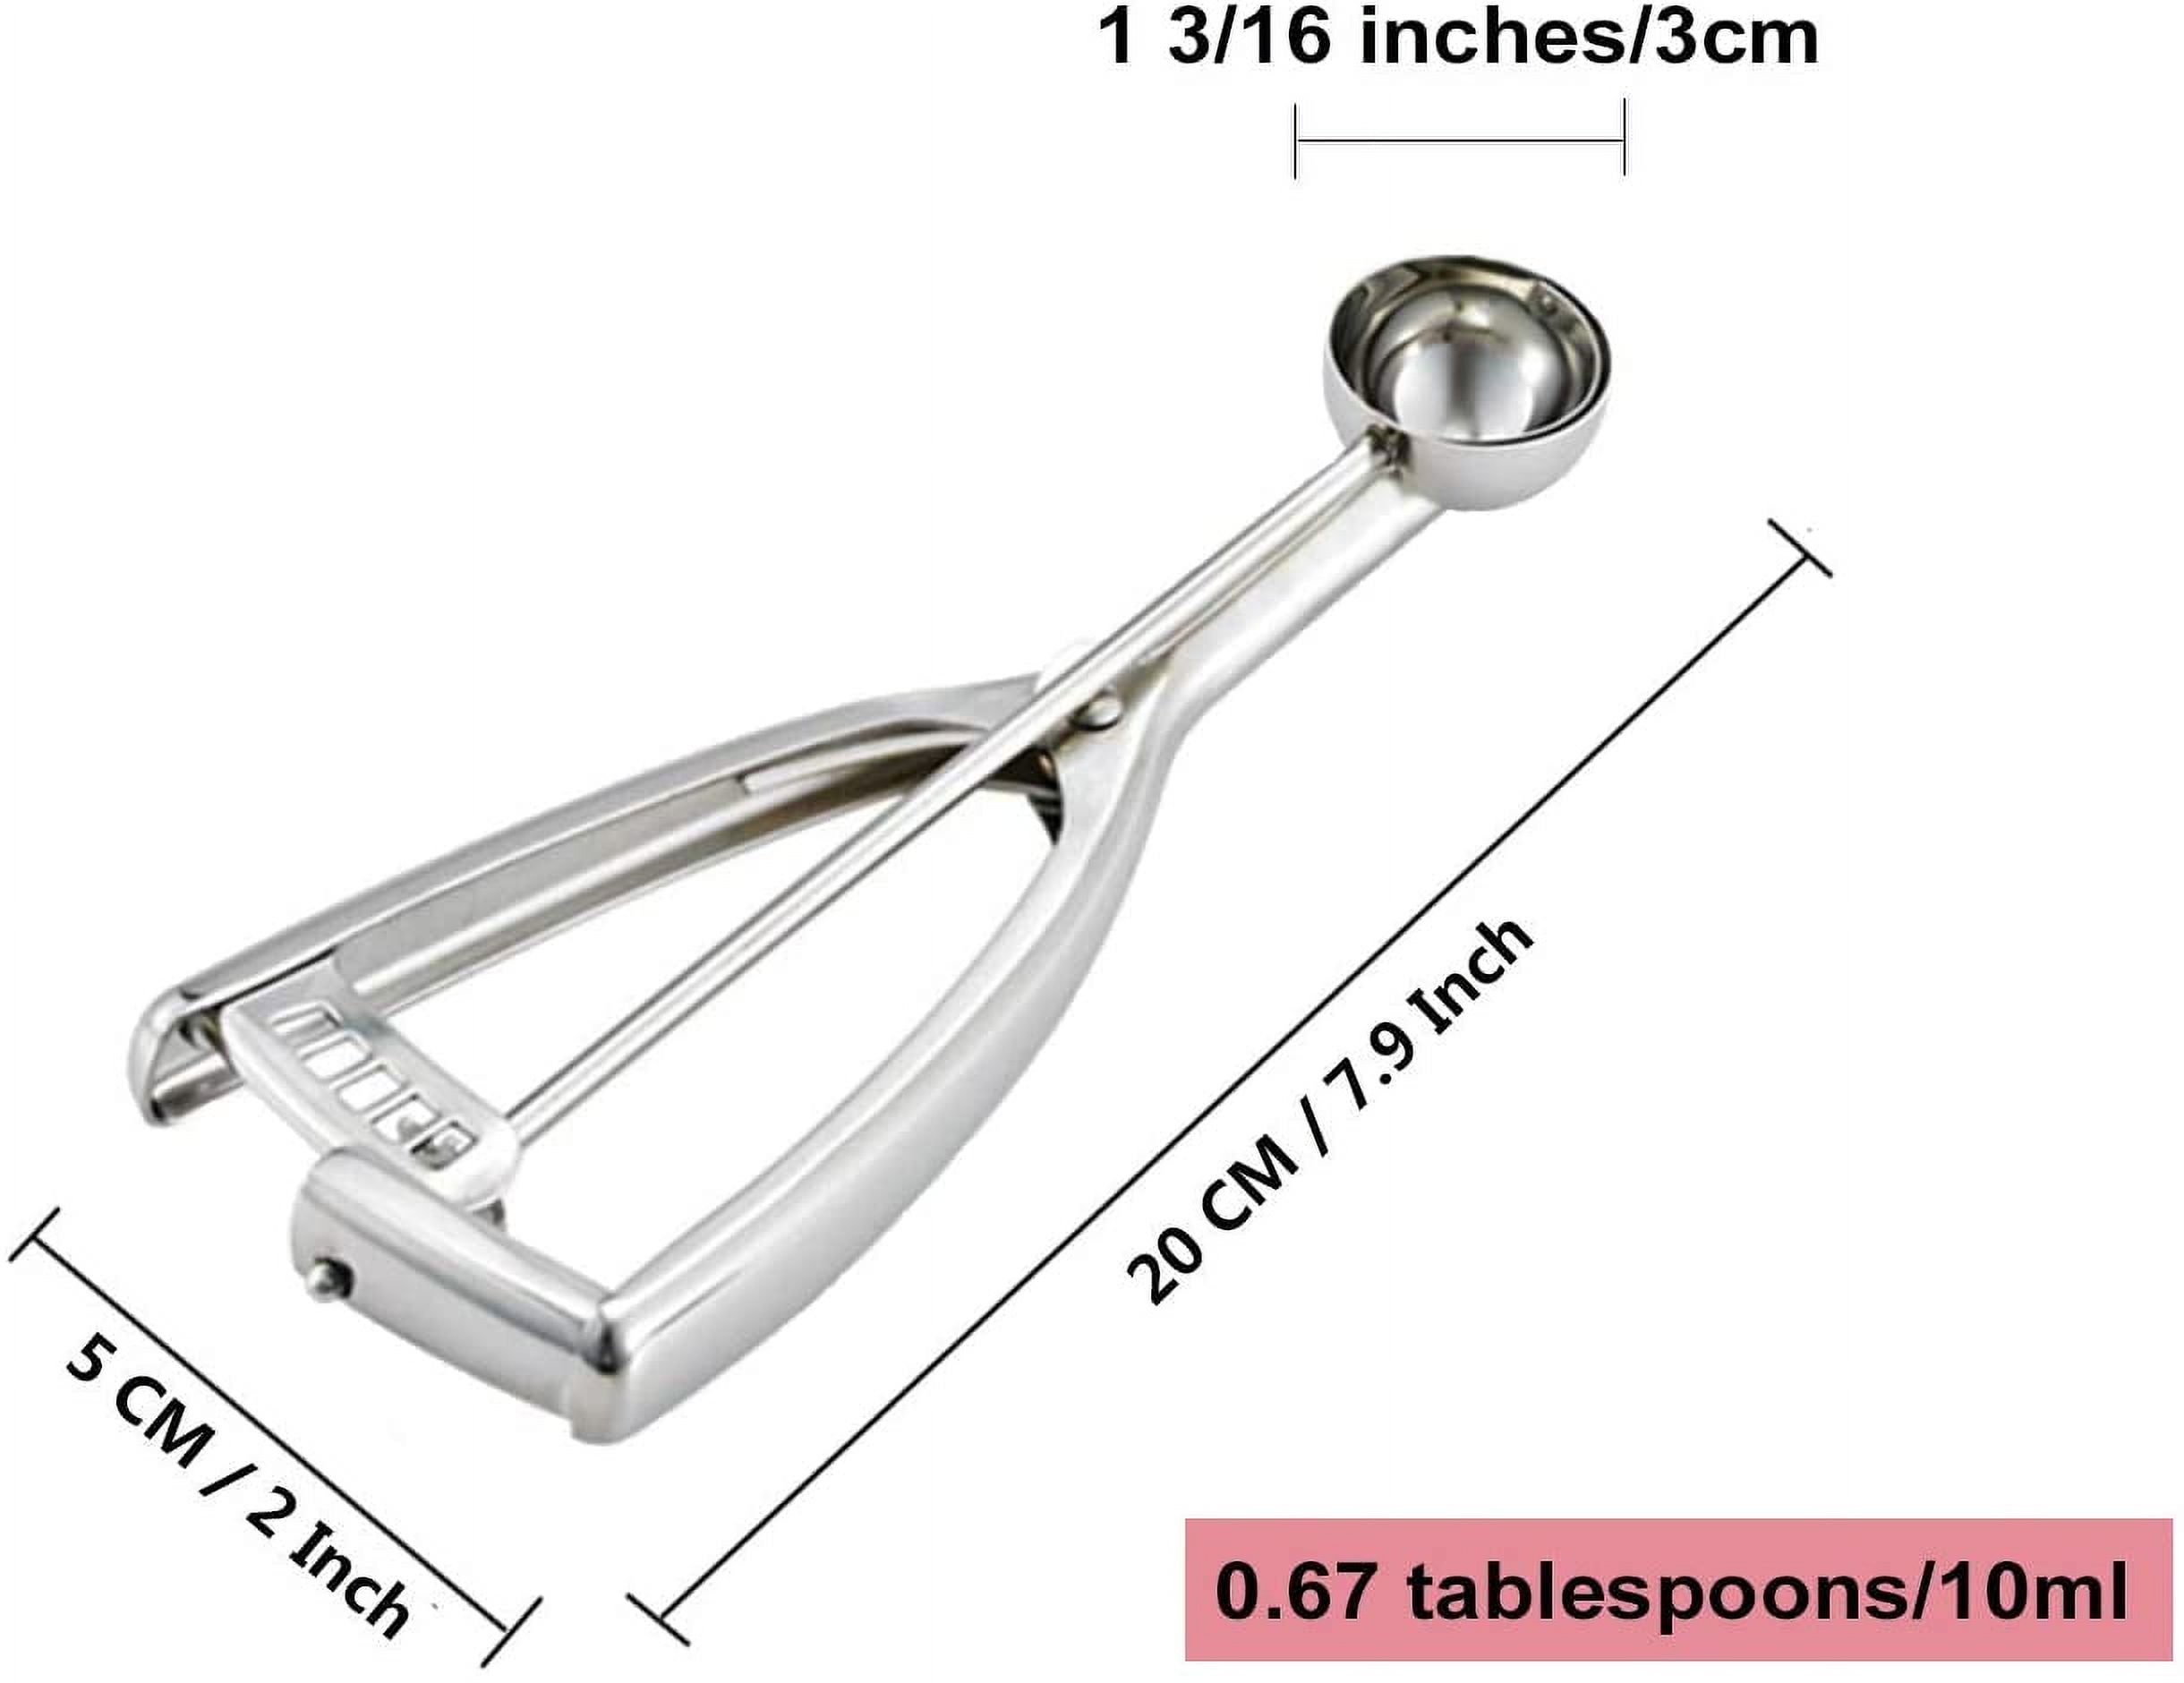 Jenaluca Mini Cookie Scoop & Melon Baller - 18/8 Stainless Steel (Small  Scoop with Gift Pack)